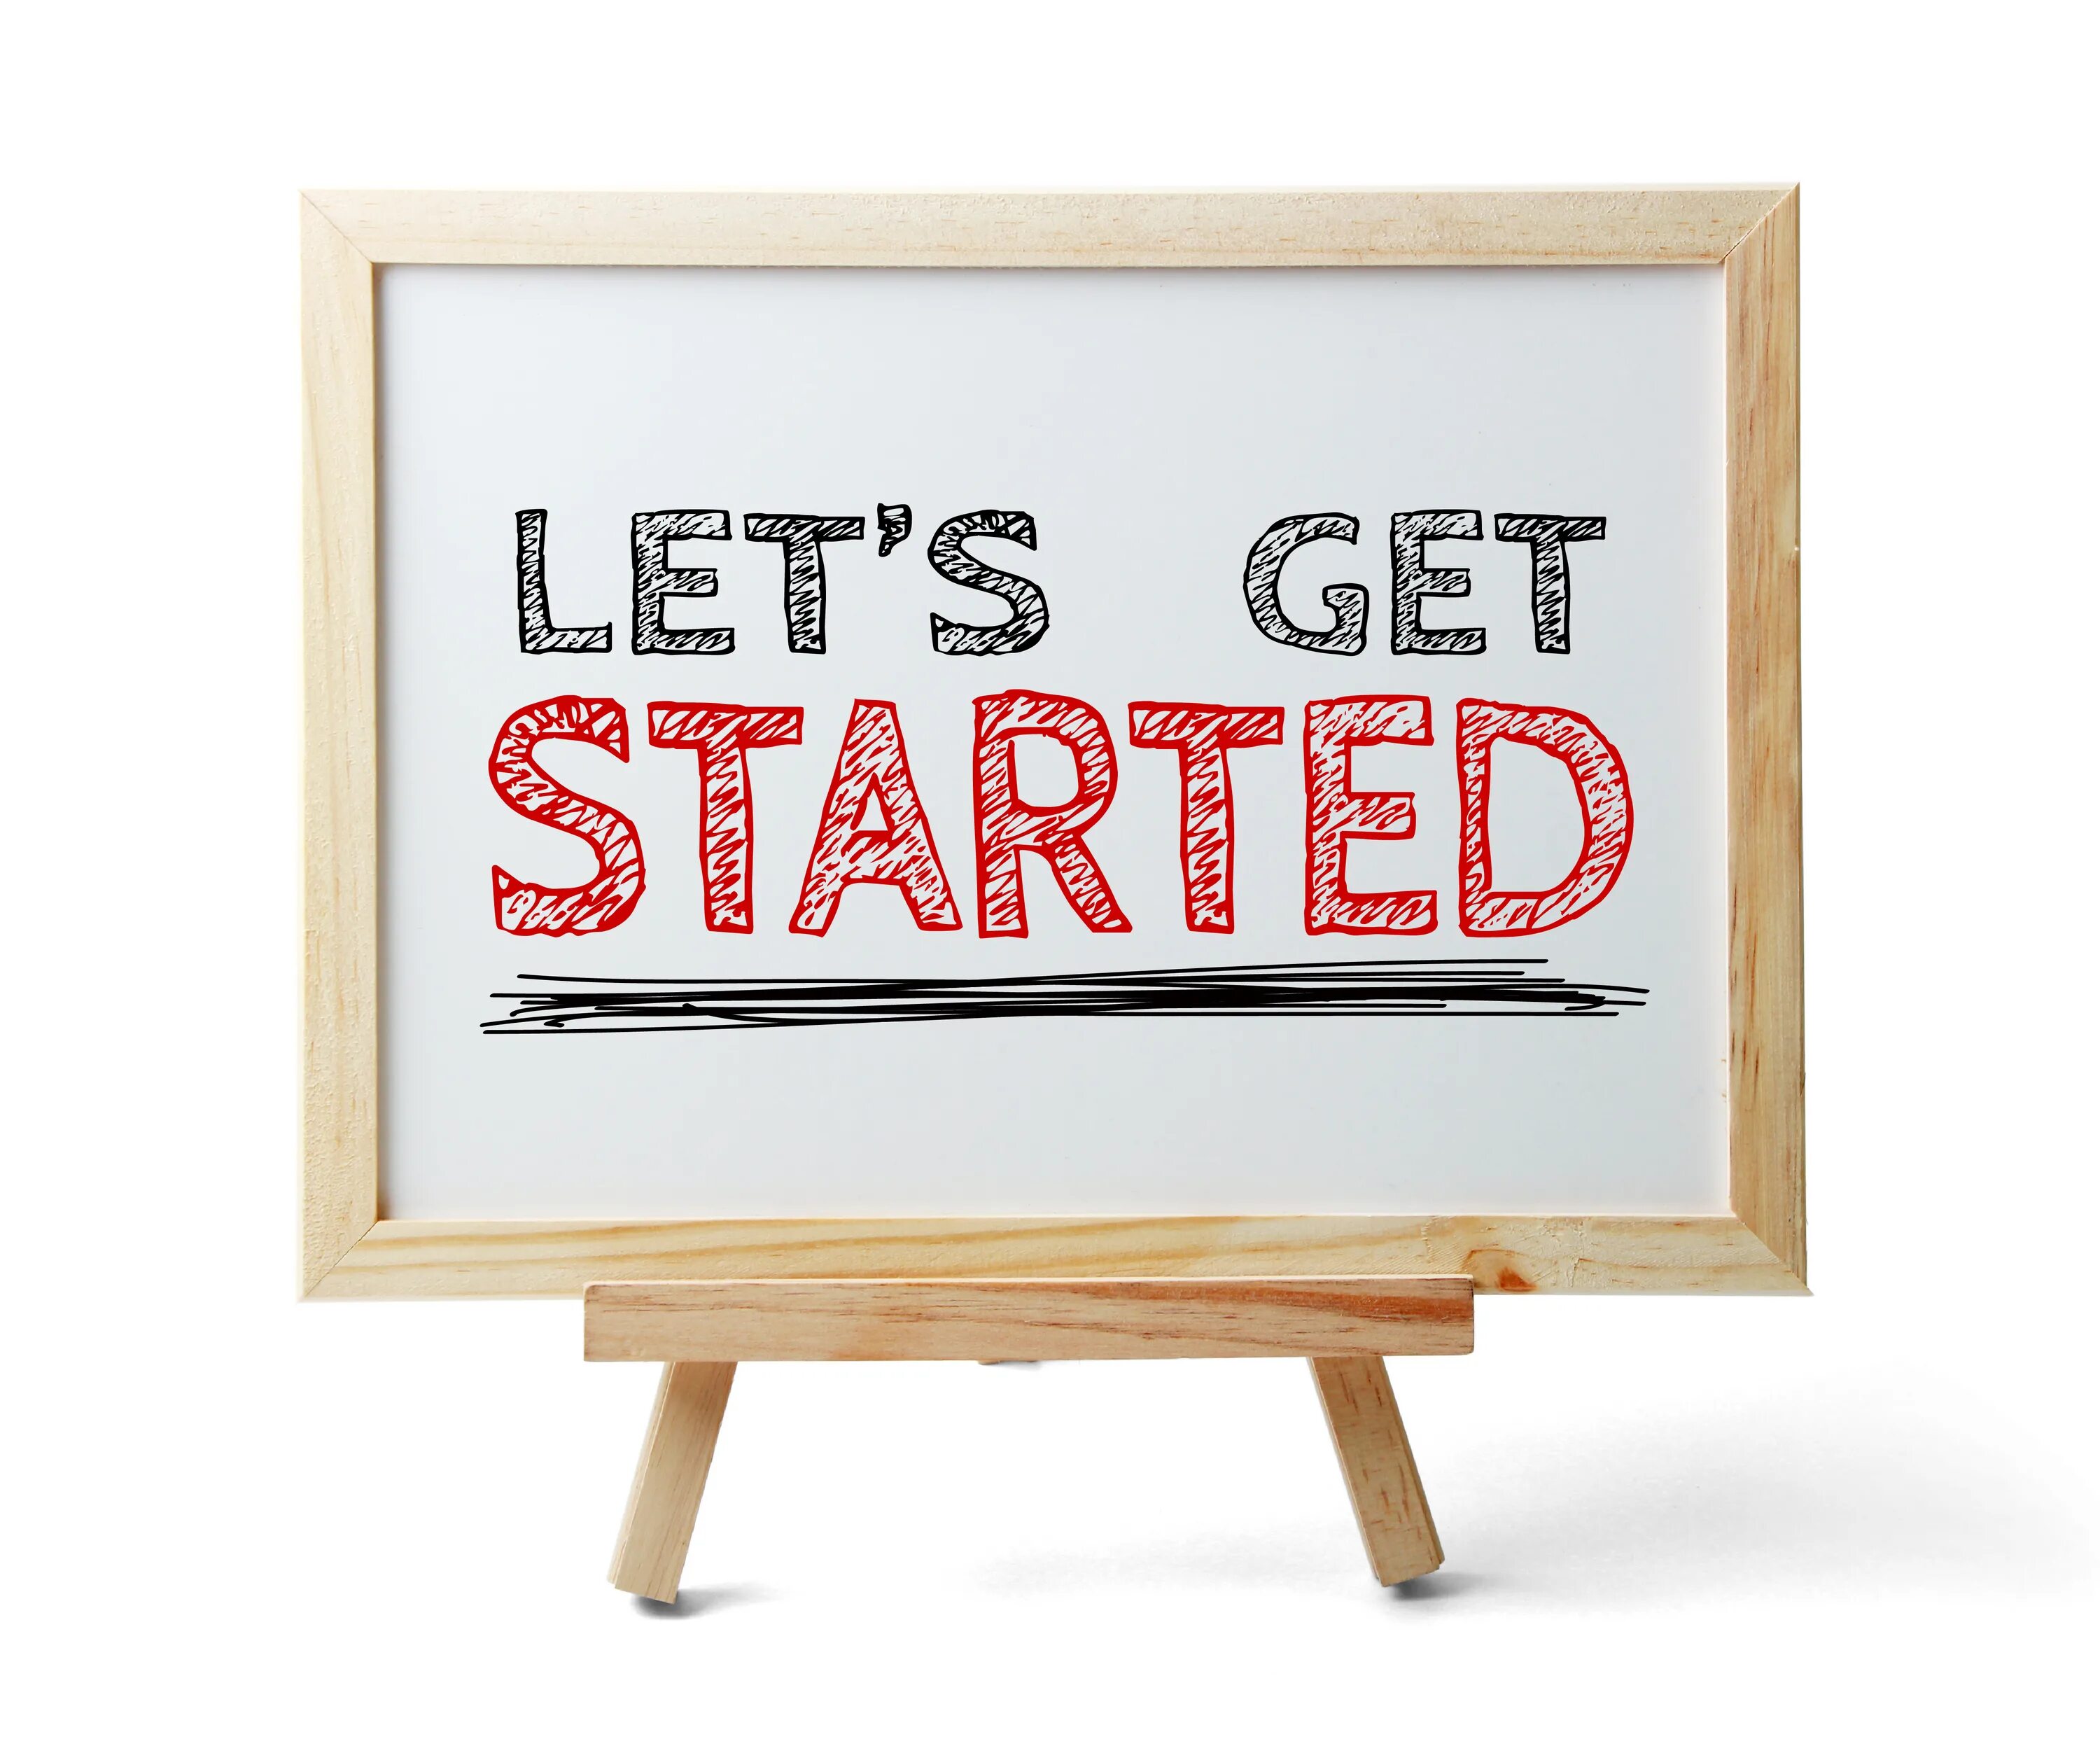 Let s get this. Let s get started. Картина start. Let`s get started картинка. Фото Lets get started на белом фоне.